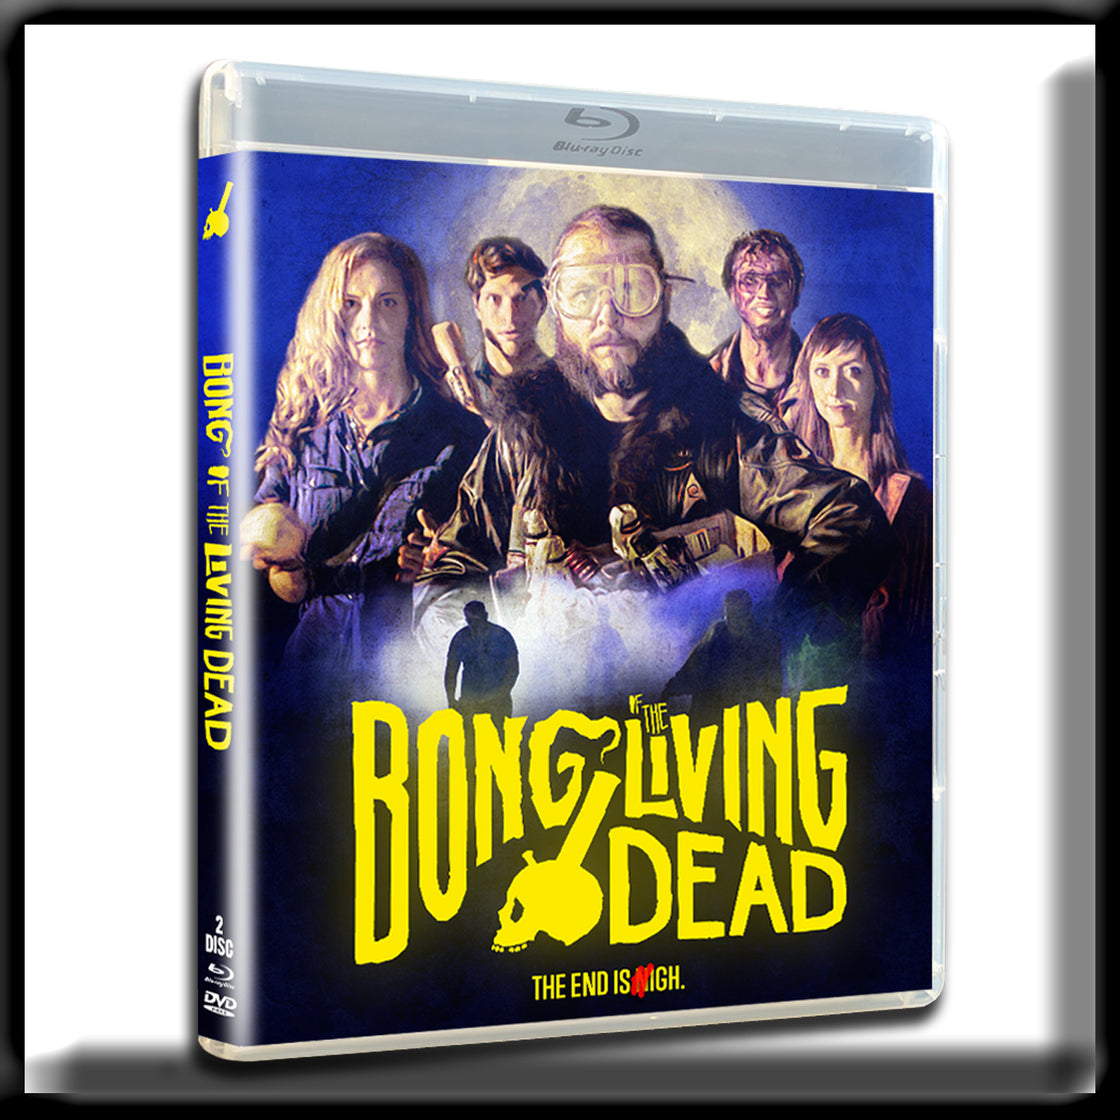 Bong of the Living Dead - Special Collectors Edition (Blu-ray)